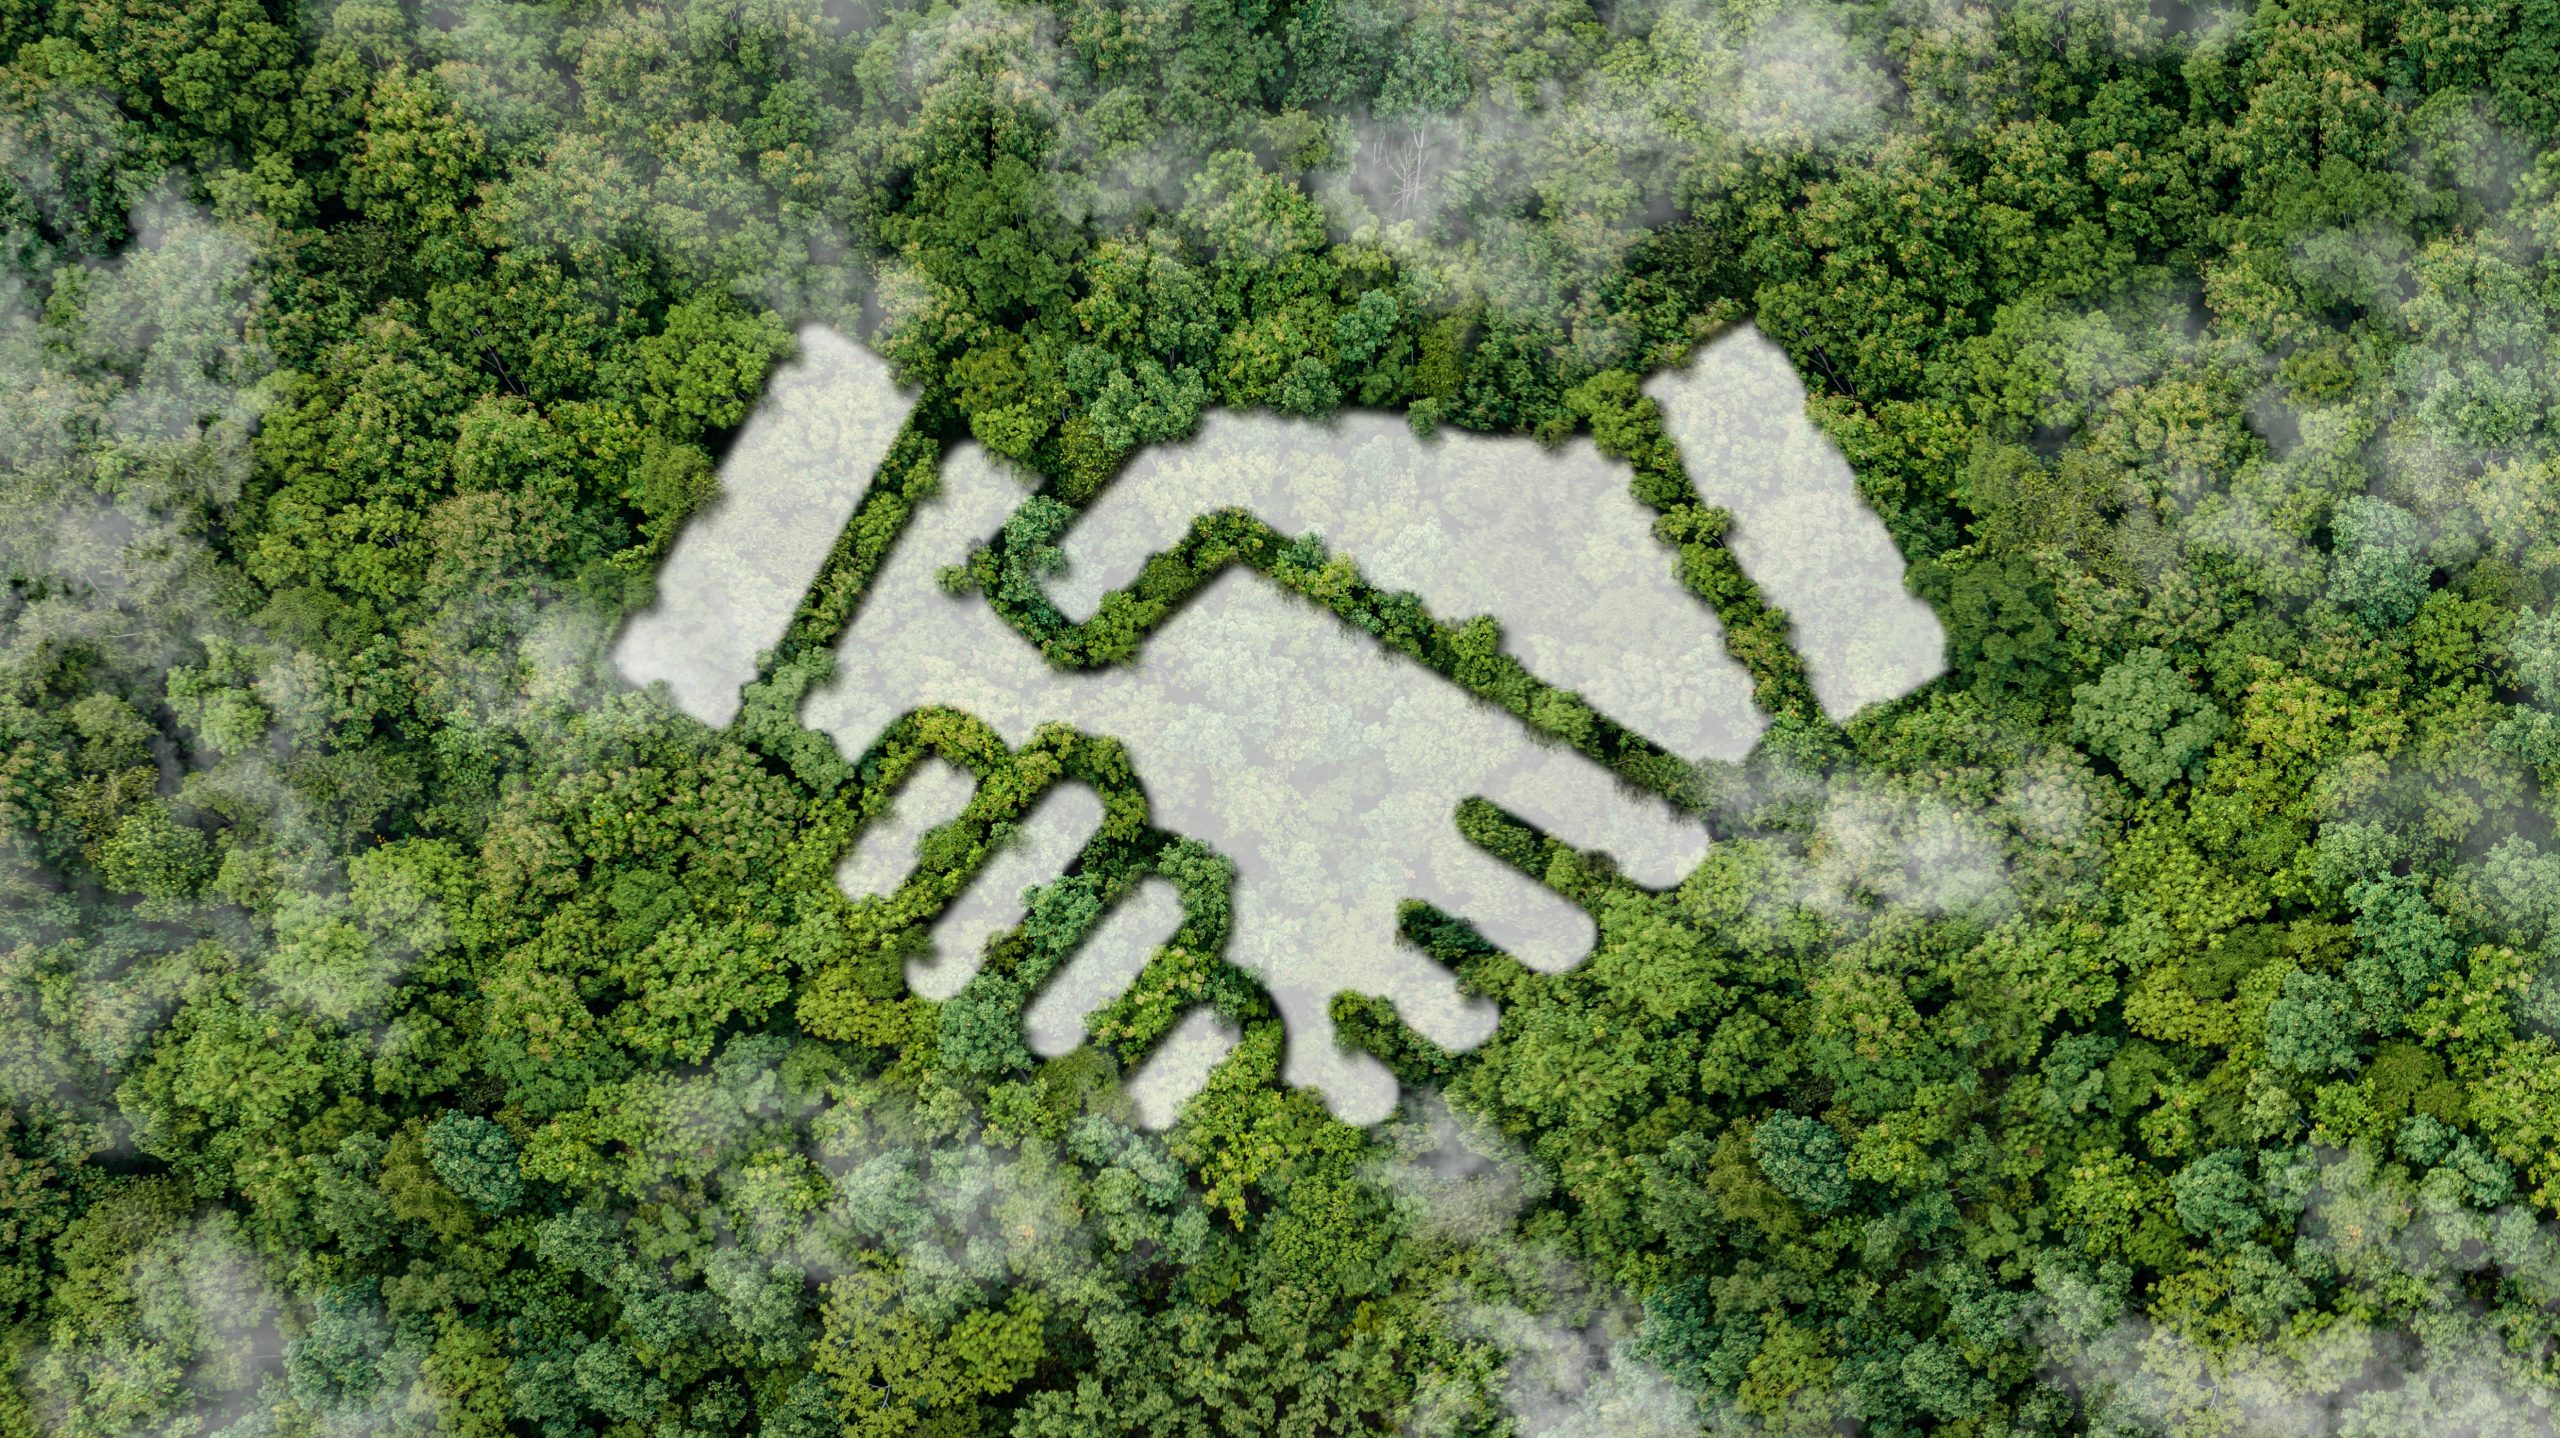 Image of two hands shaking in woodlands showing a sustainable supply chain